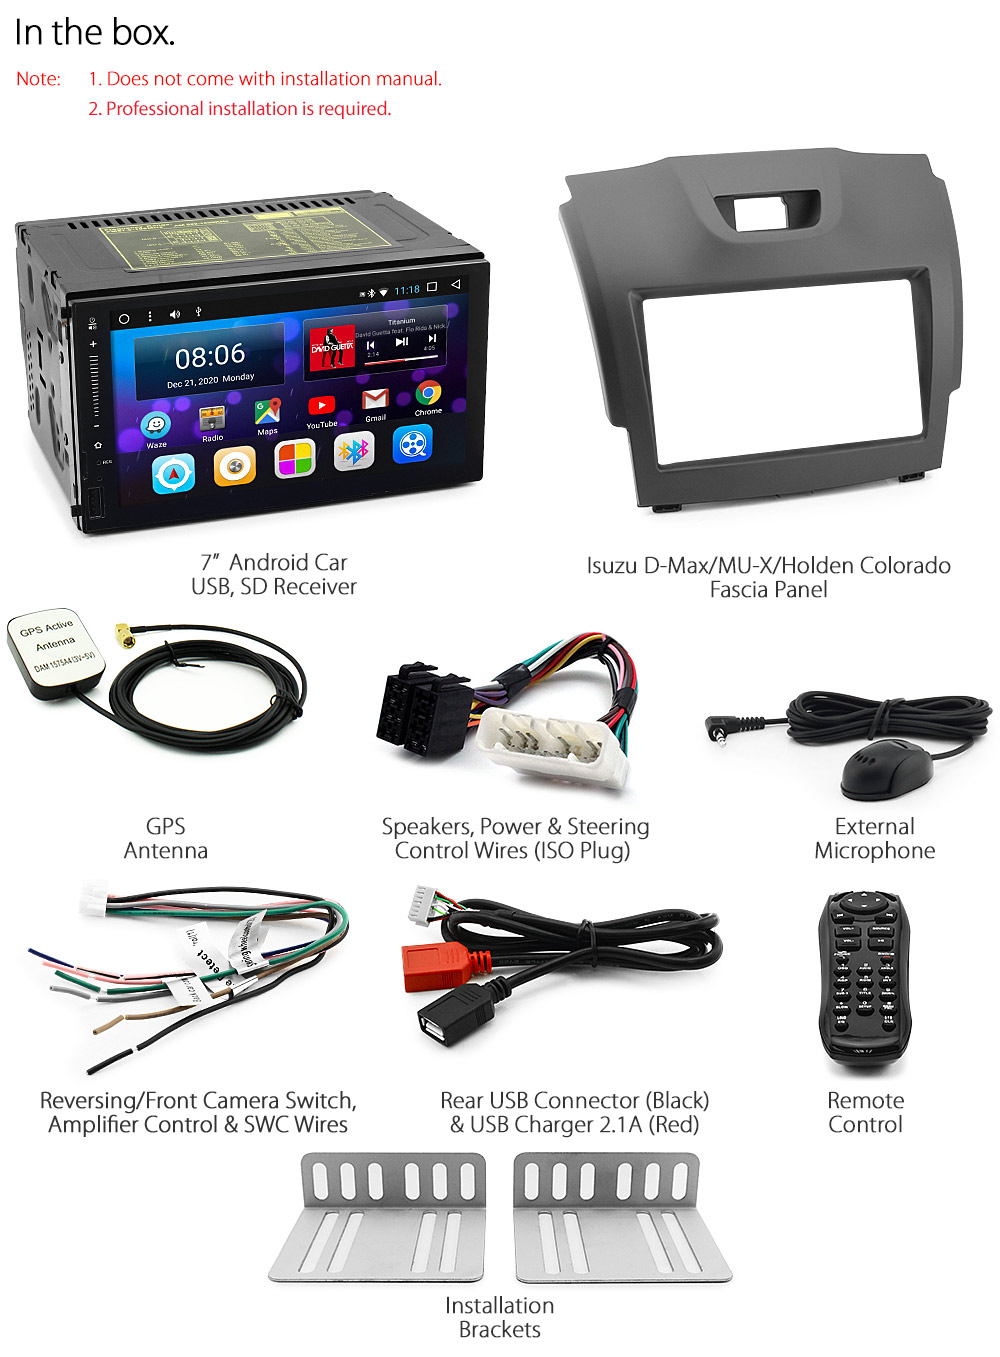 ISZ15AND GPS Aftermarket Isuzu D-Max MU-X Holden Chevrolet Colorado 2nd Generation Gen Europe European Australia USA Year 2012 2013 2014 2015 2016 2017 2018 2019 Original Android 7.1 Nougat car USB Charger 2.1A SD player radio stereo head unit details Aftermarket External and Internal Microphone Bluetooth Europe Sat Nav Navi Plug and Play ISO Plug Wiring Harness Matching Fascia Kit Facia Free Reversing Camera Album Art ID3 Tag RMVB MP3 MP4 AVI MKV Full High Definition FHD AirPlay Air Play MirrorLink Mirror Link 1080p DAB+ Digital Radio DAB + Double DIN Patch Lead Connects2 CTSIZ001.2